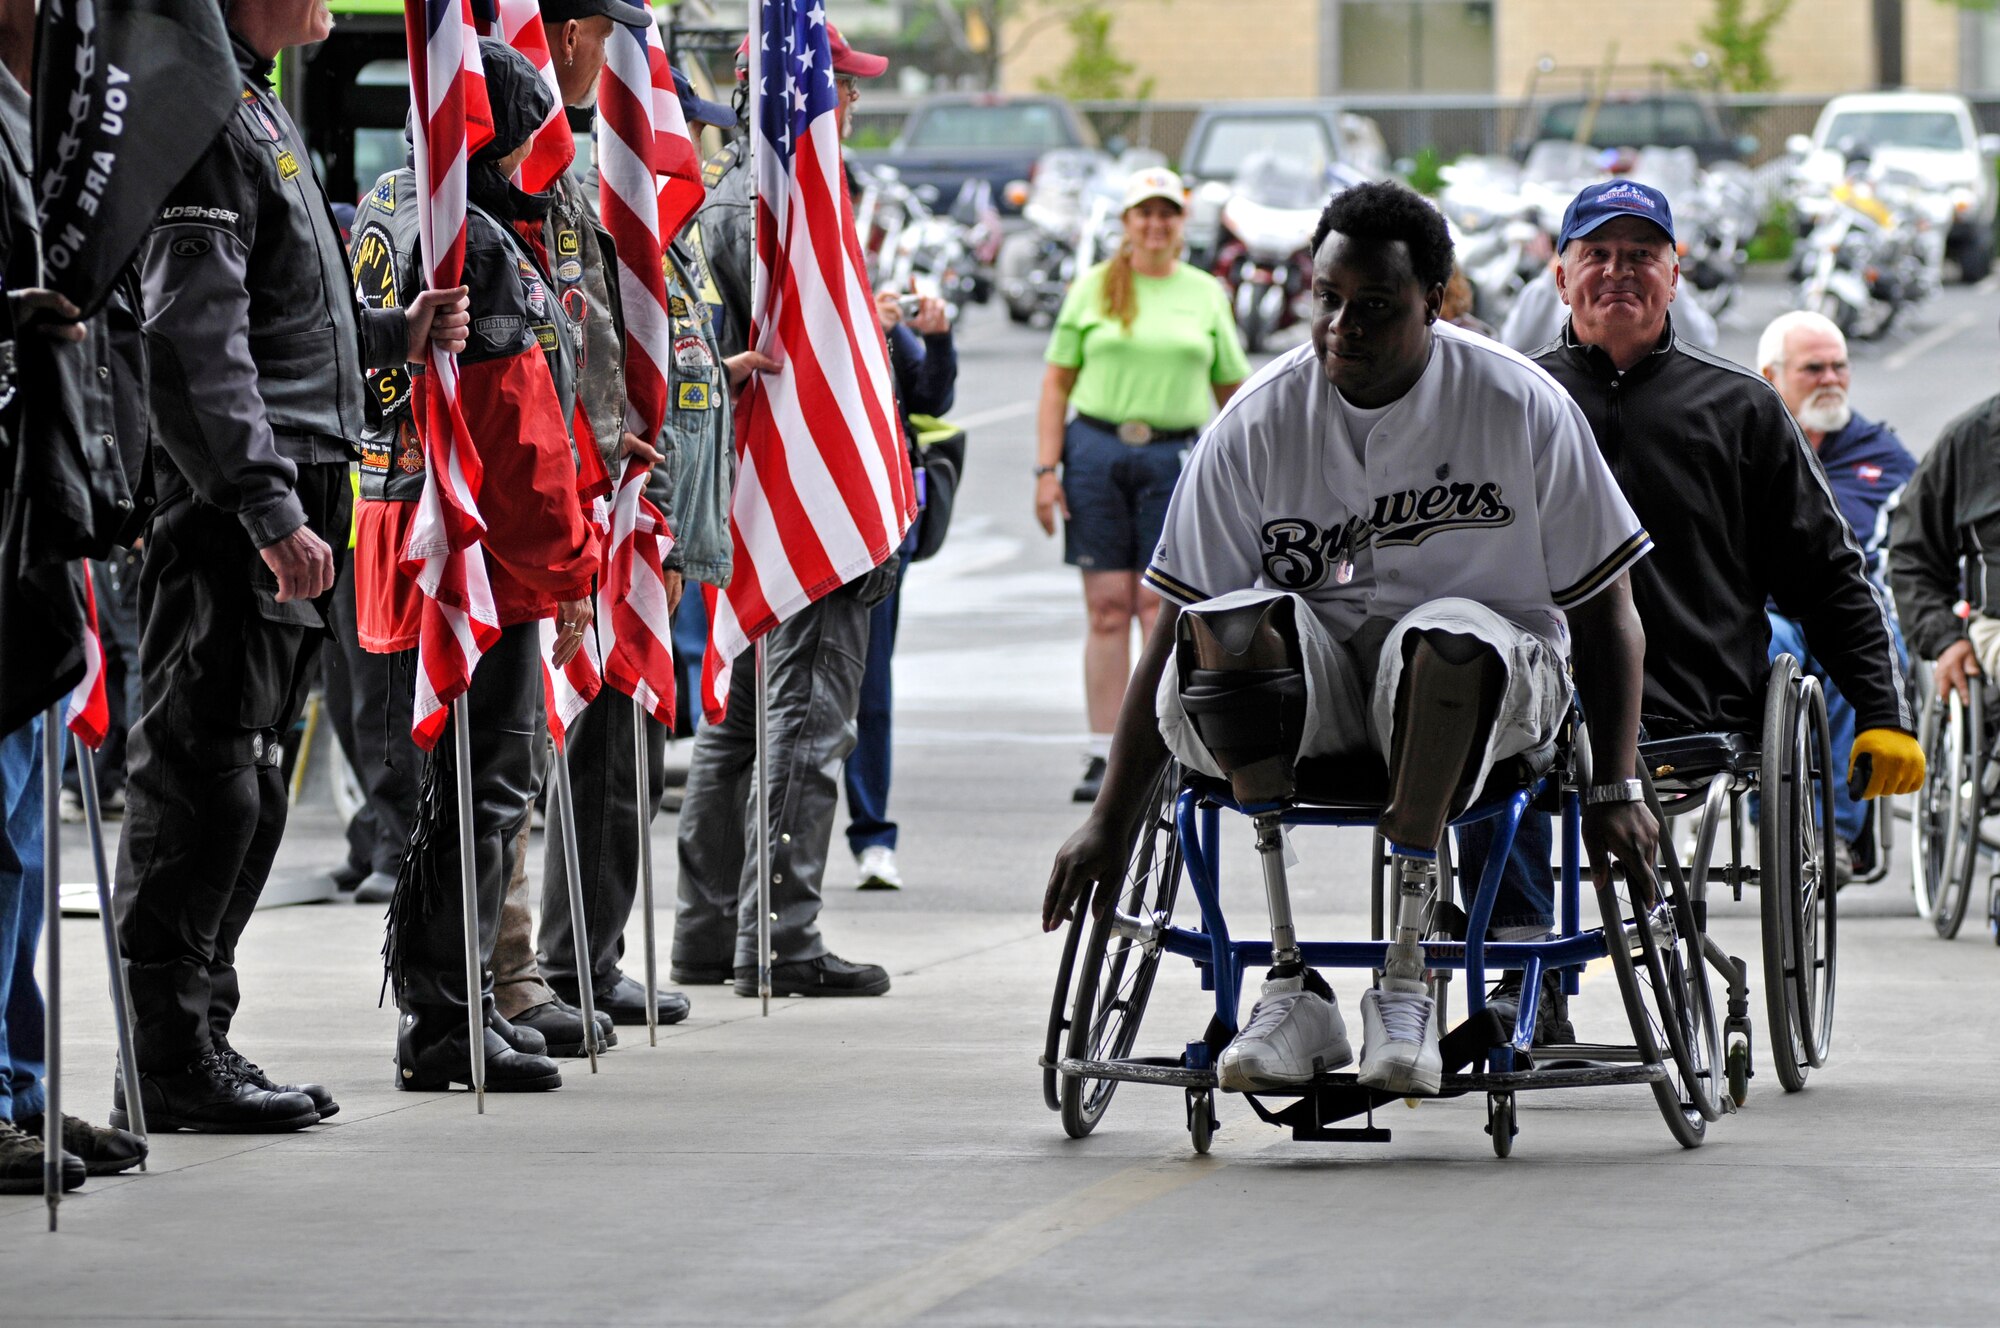 Athletes participating in the 29th National Veterans Wheelchair Games (NVWG) are greeted by the Washington Patriot Guard in preparation for the game’s opening ceremony. First held in 1981, the even has grown to include more than 500 athletes competing in 17 different events. The games are being held here in Spokane, WA from the 13 - 18th of July, 2009. (U.S. Air Force photo by Staff Sgt Anthony Ennamorato)